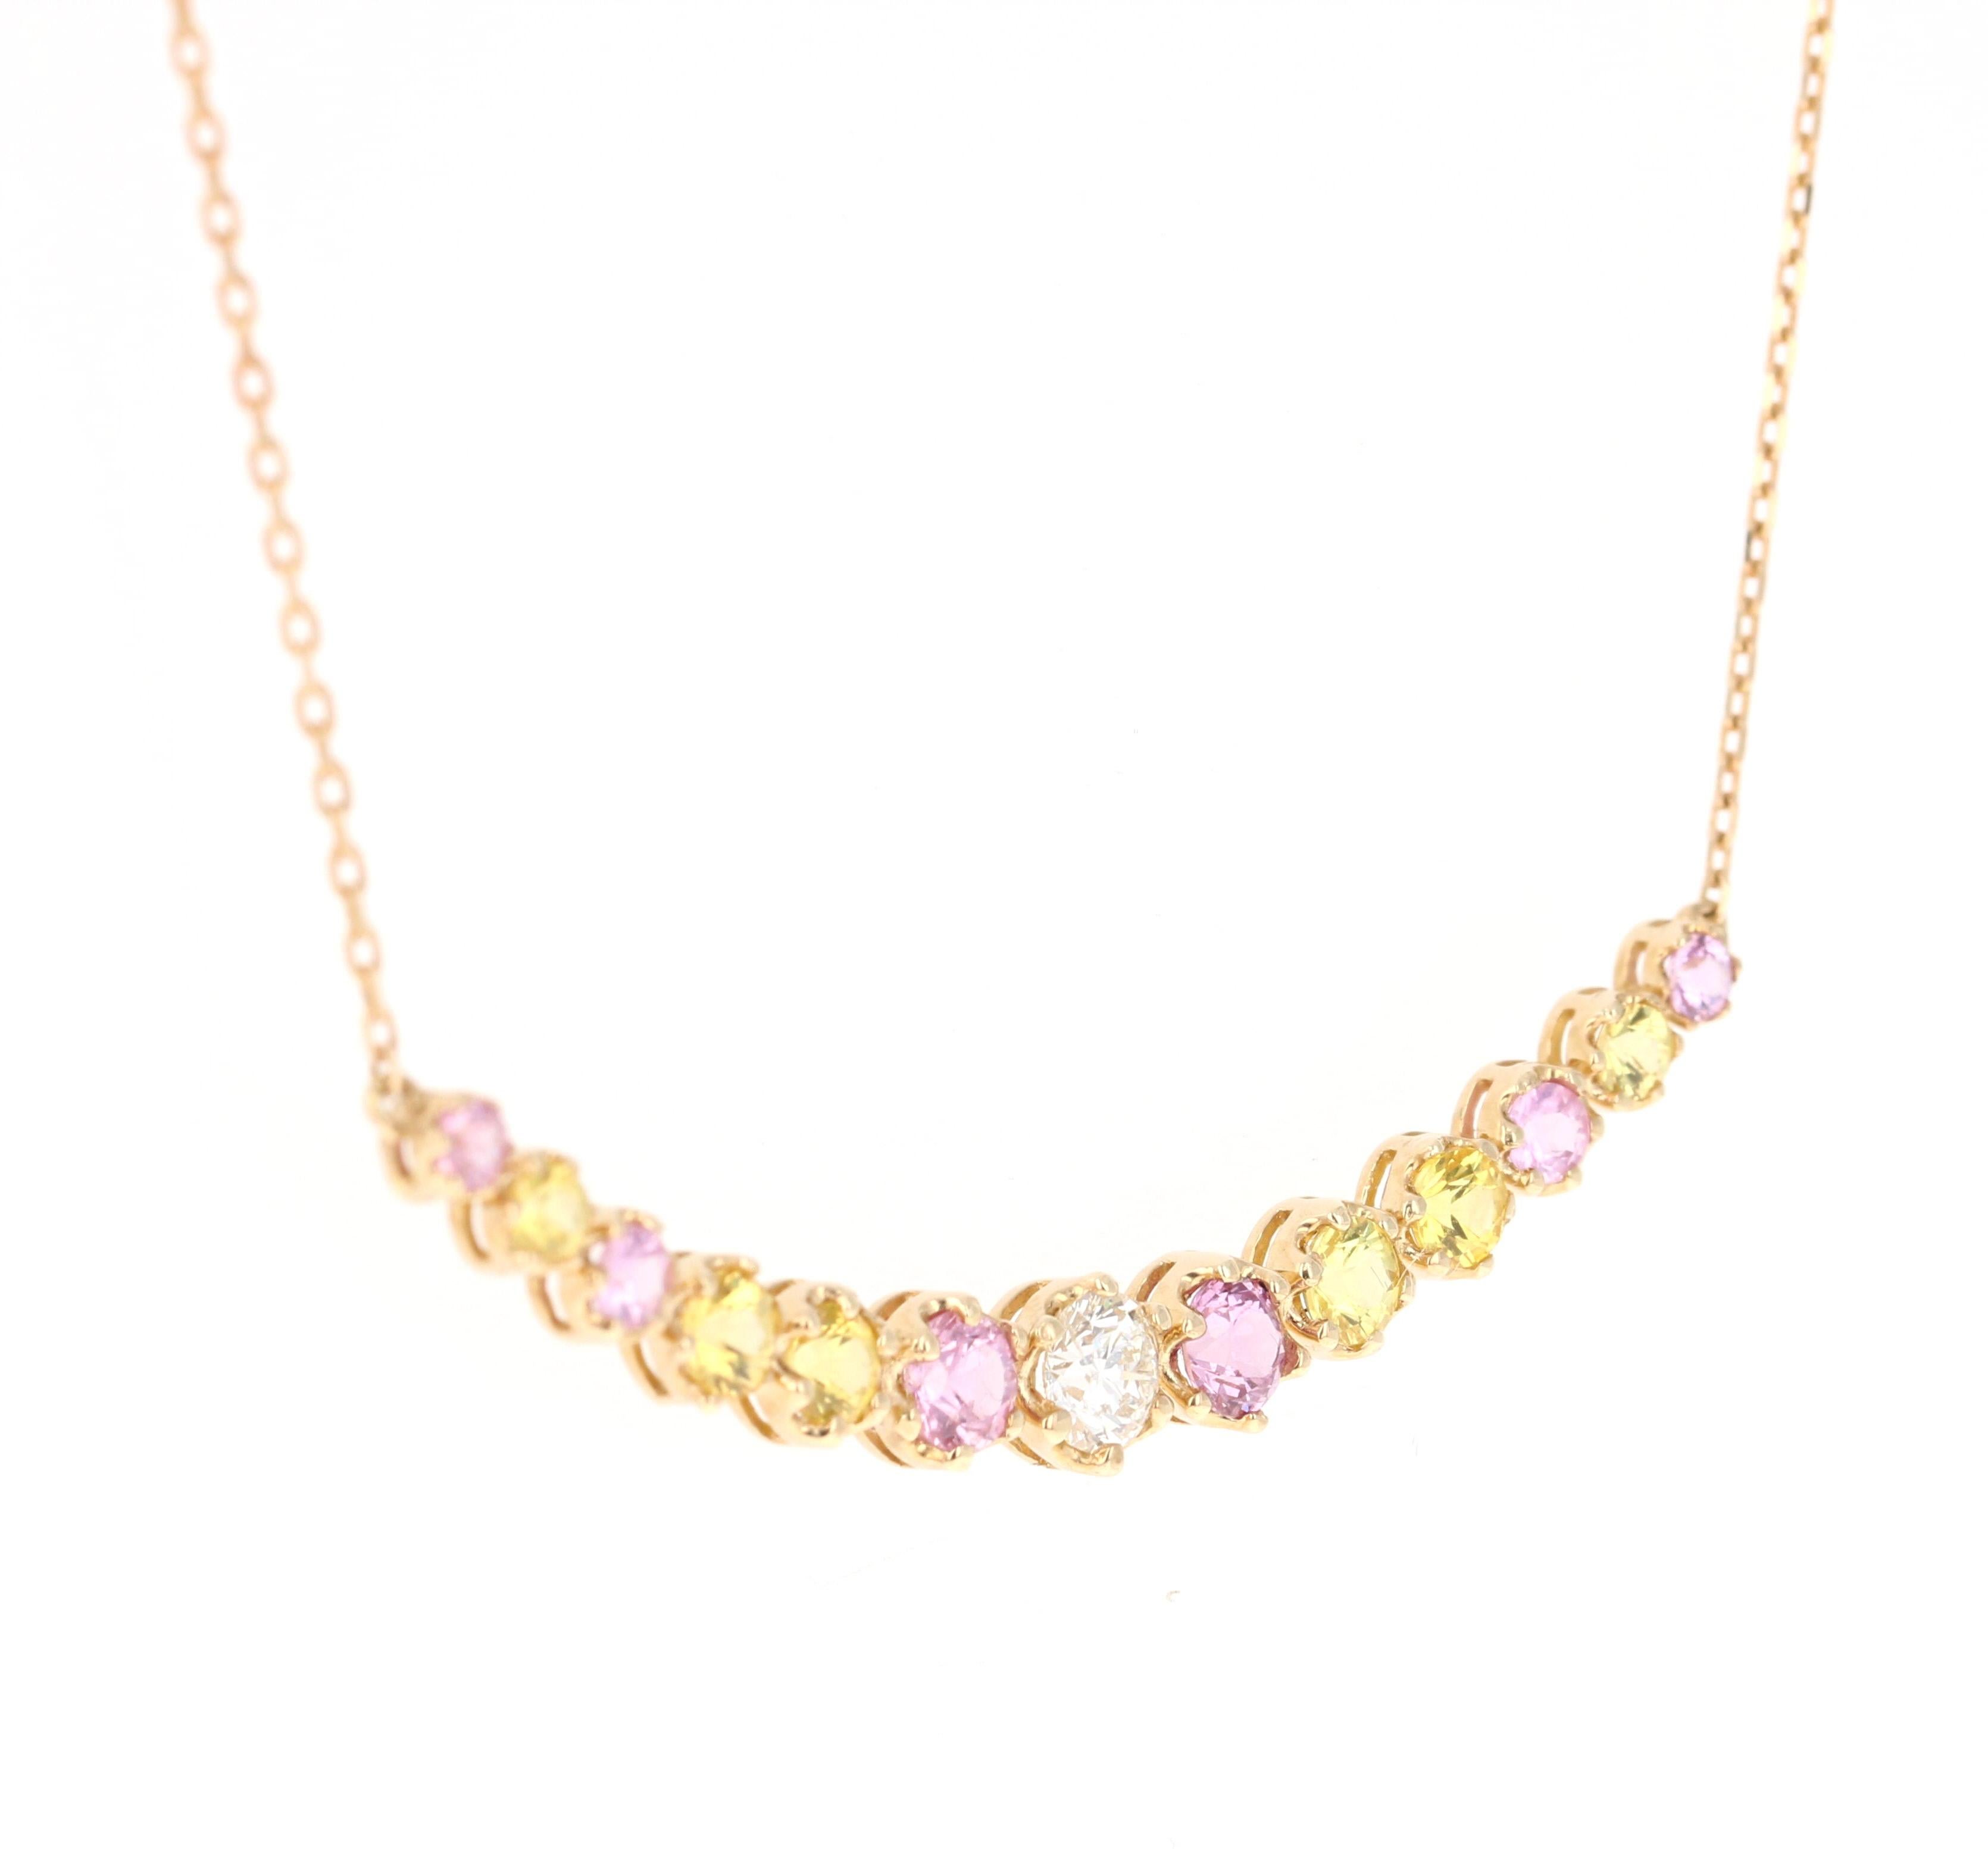 This Chain Necklace has a U-Shaped Pendant that has 12 Multi Colored Sapphires that weigh 1.52 carats and 1 Round Cut Diamond that weighs 0.30 carats. The total carat weight of the Pendant is 1.82 carats. 

It is beautifully curated in 14 Karat